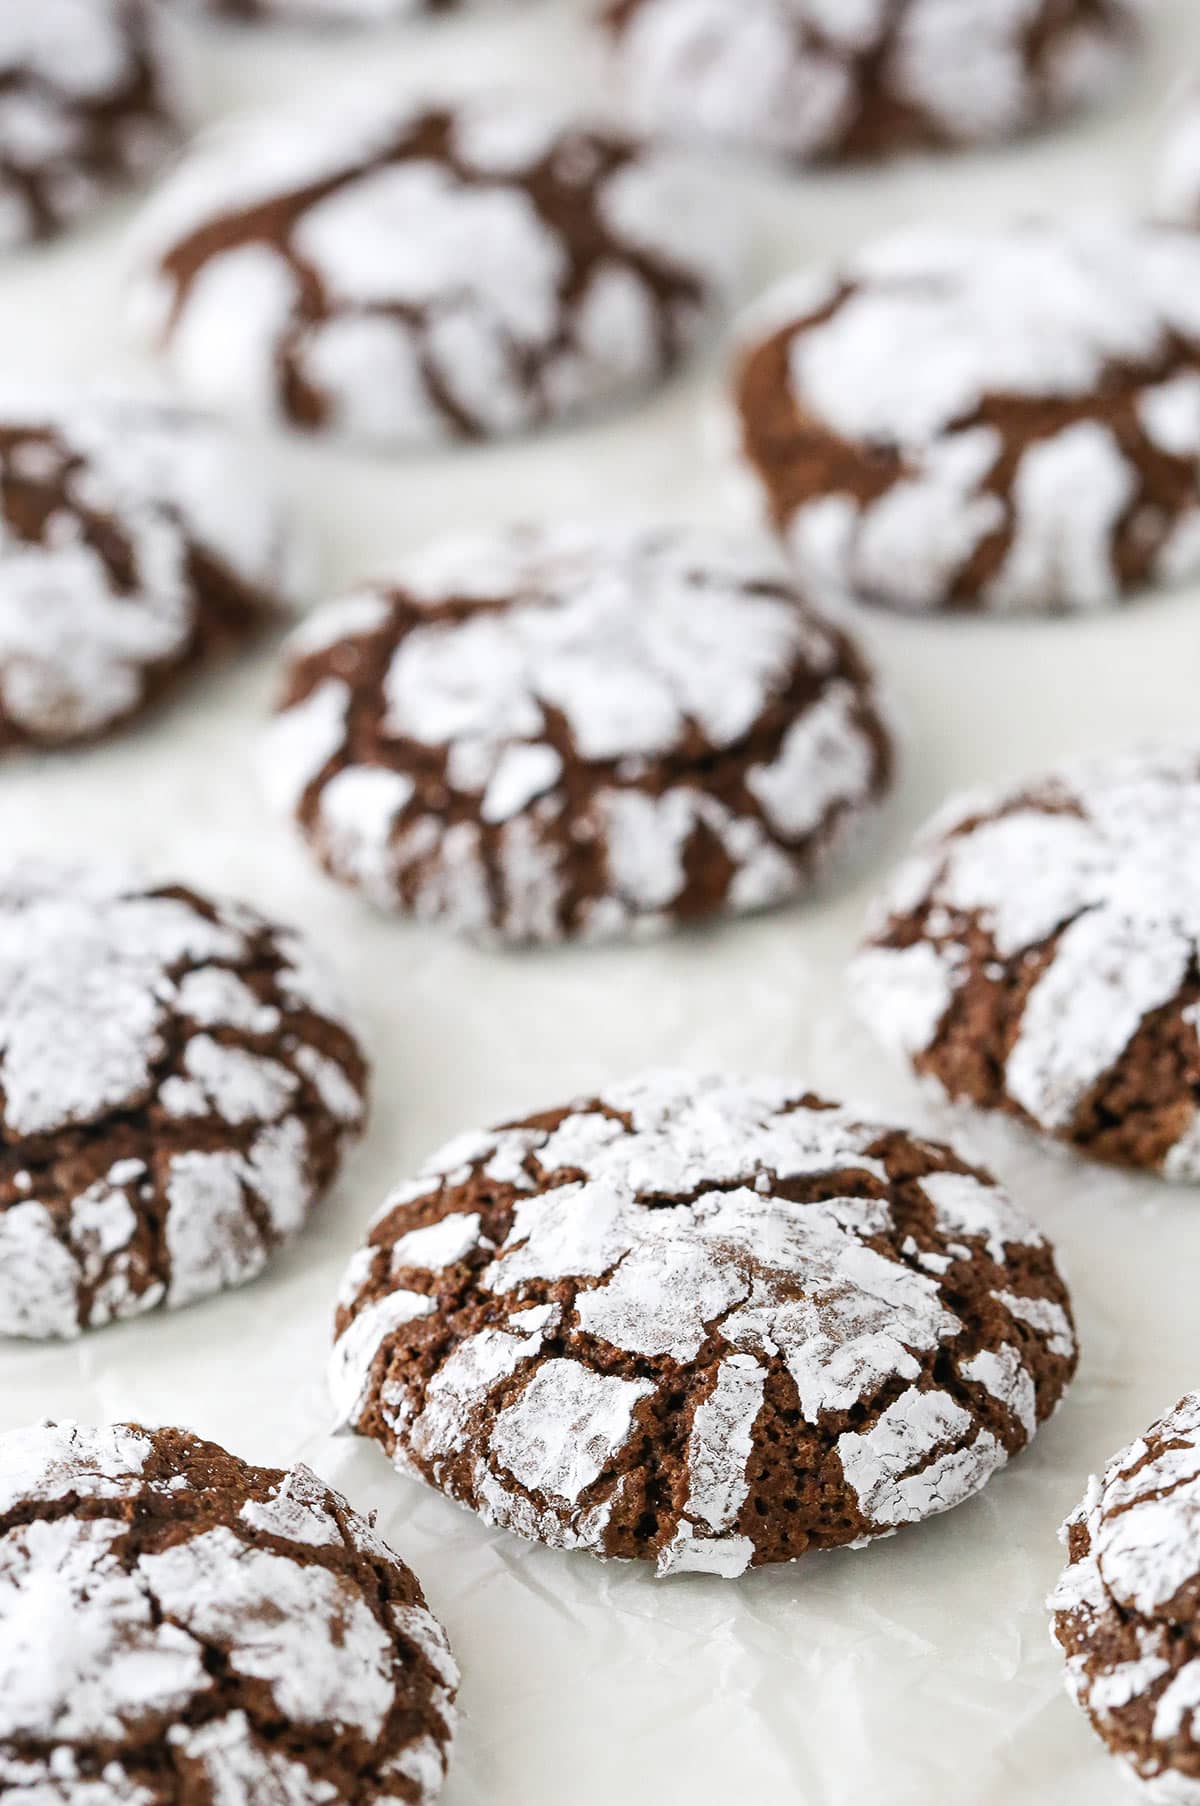 Chocolate crinkle cookies on a white surface.